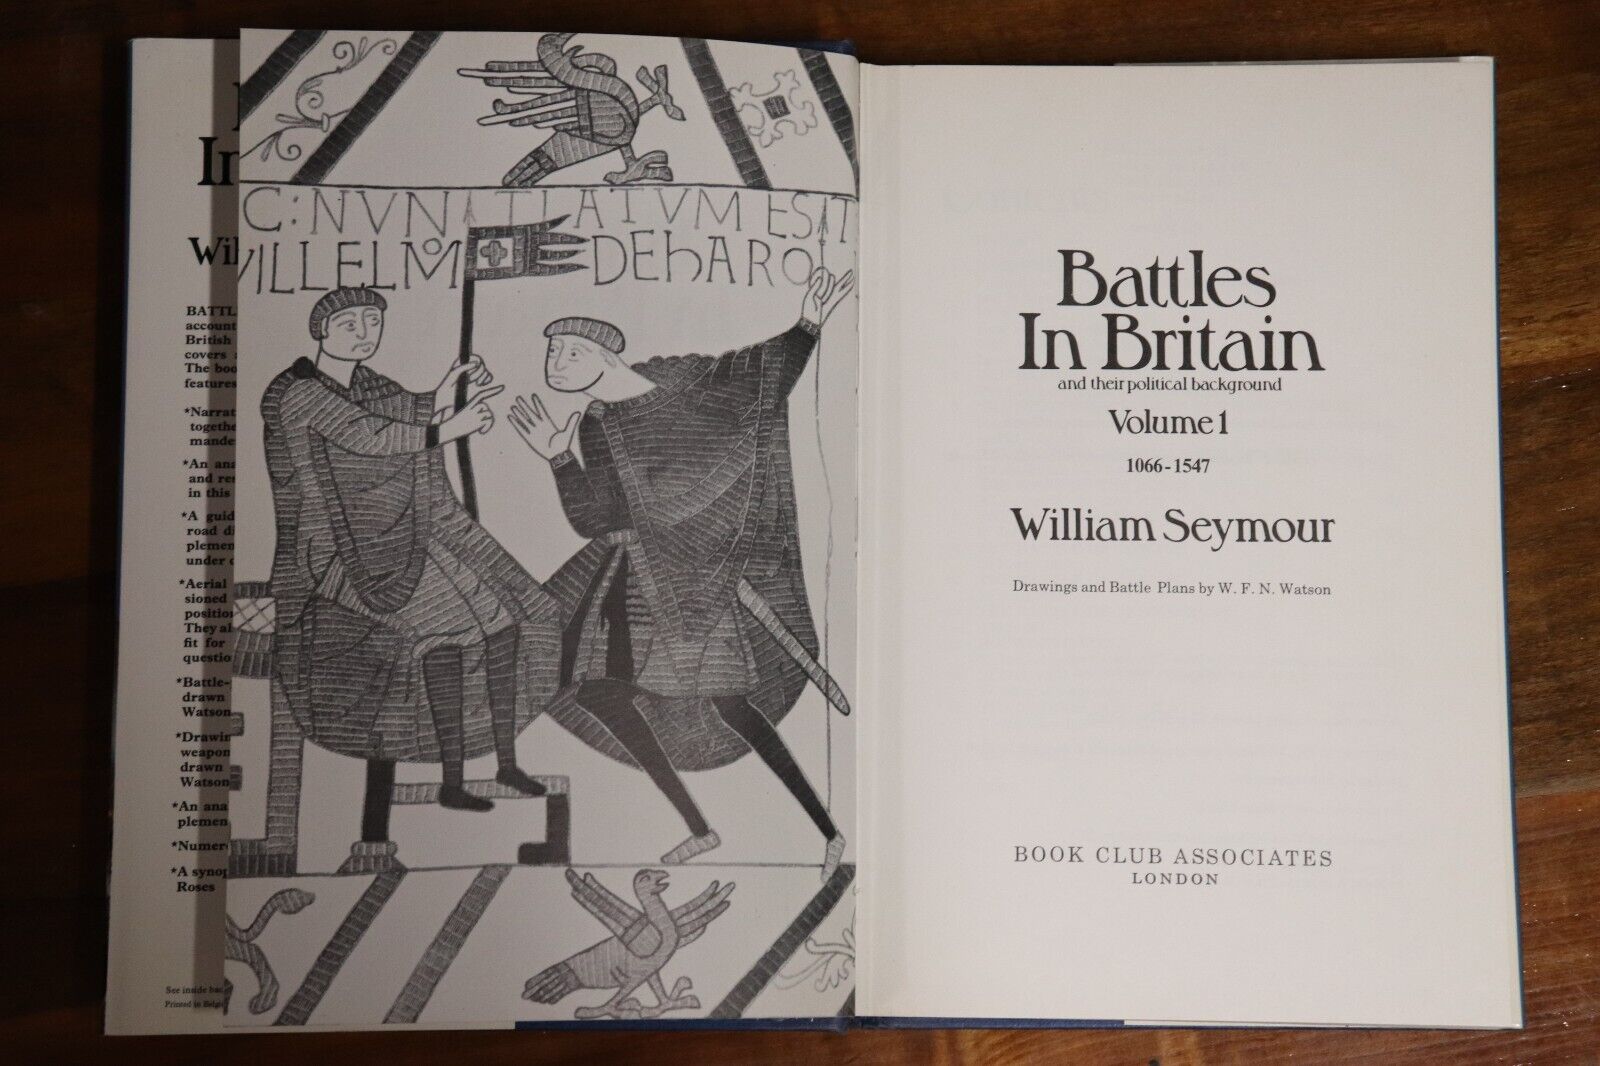 Battles In Britain 1066 to 1547 by William Seymour - 1975 - Military Book